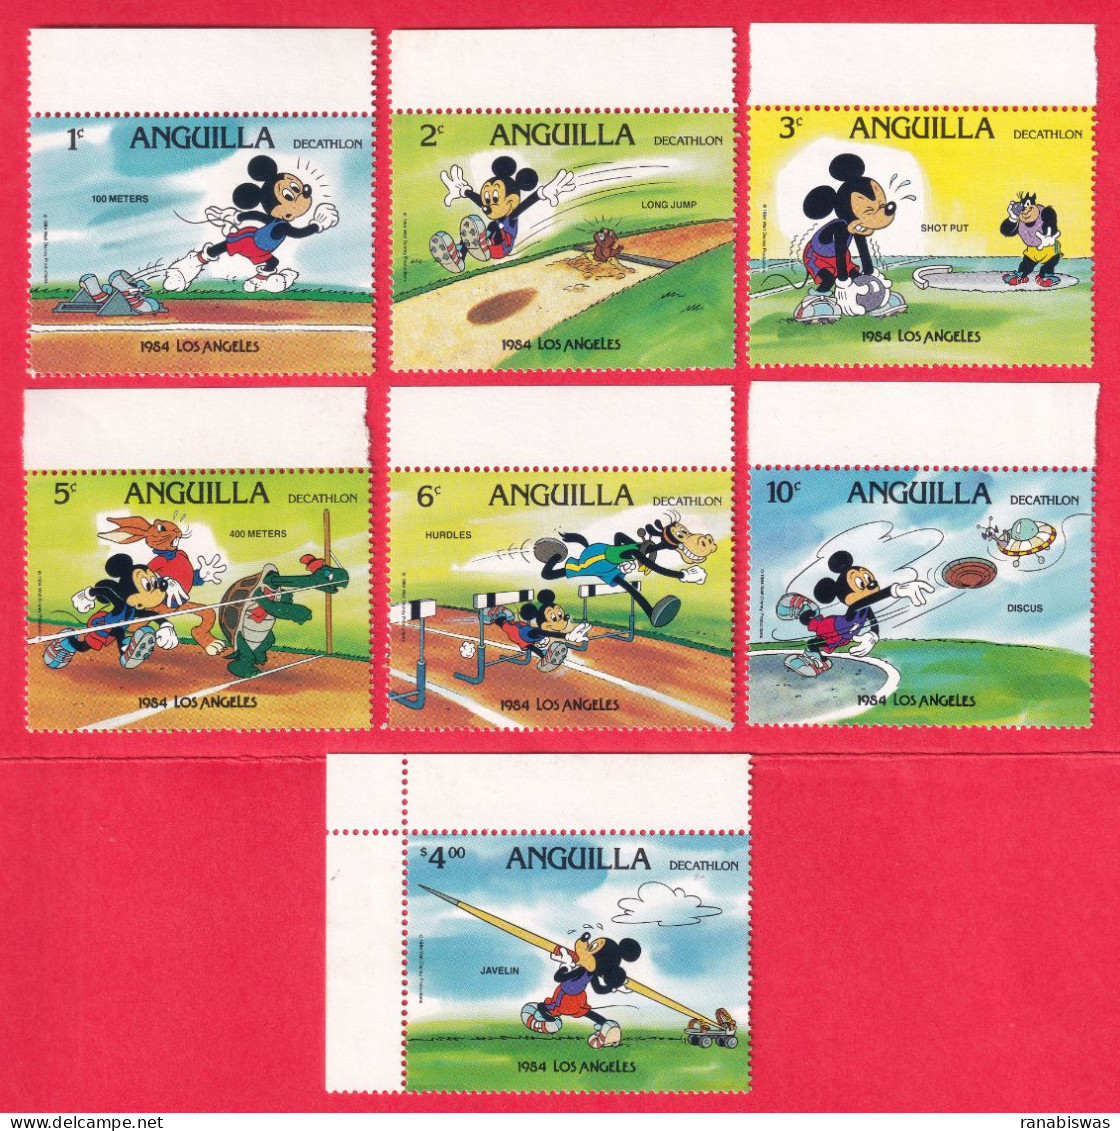 ANGUILLA STAMPS 1984, SET OF 7, SPORTS, MICKEY MOUSE CARTOON, MNH - Anguilla (1968-...)